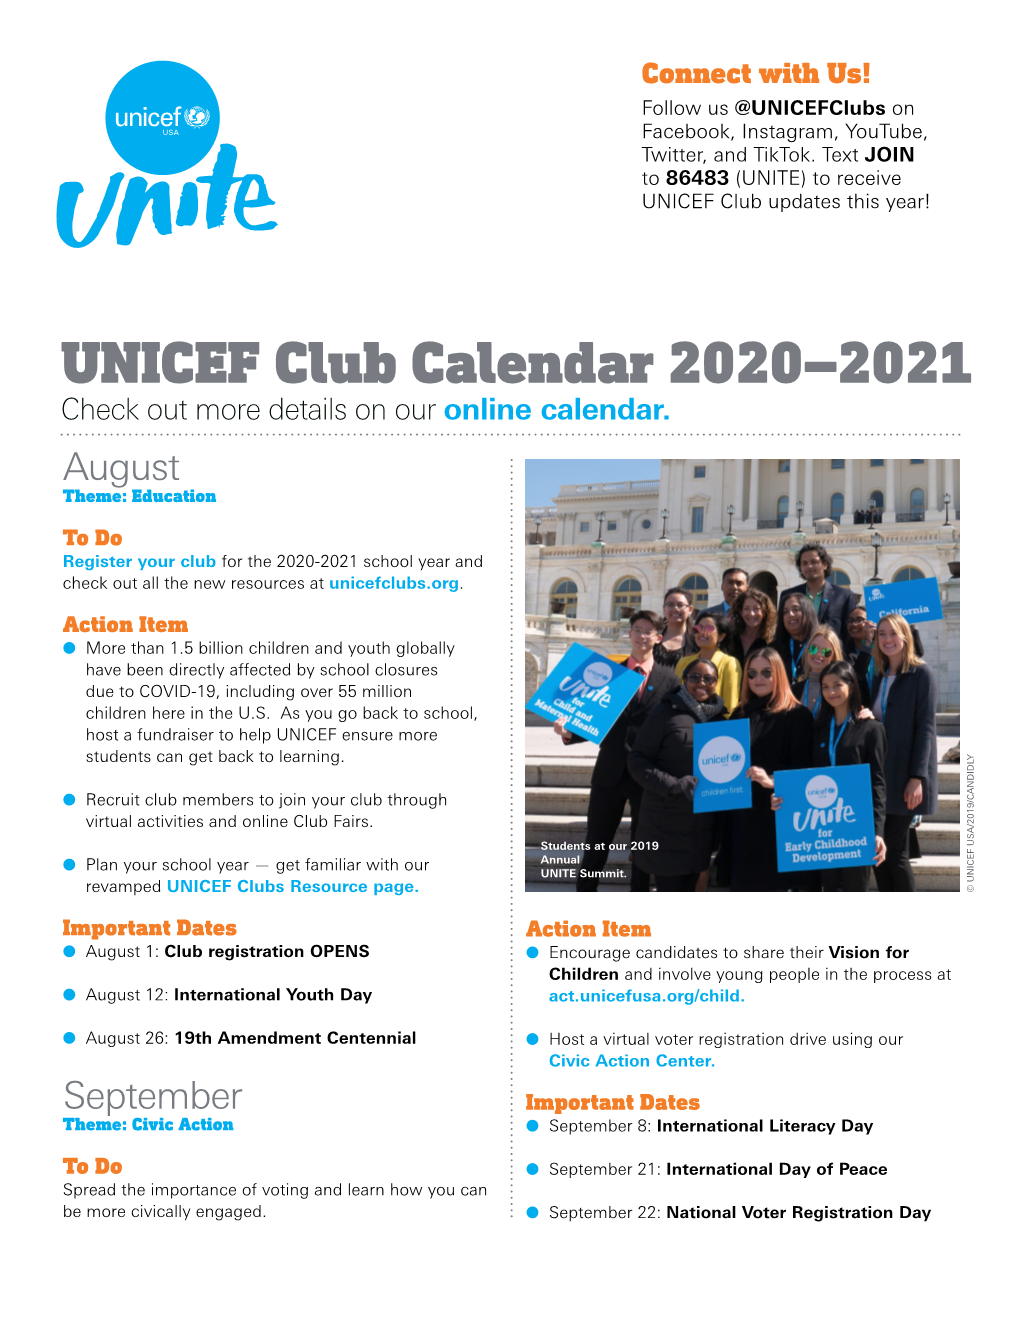 UNICEF Club Calendar 2020–2021 Check out More Details on Our Online Calendar